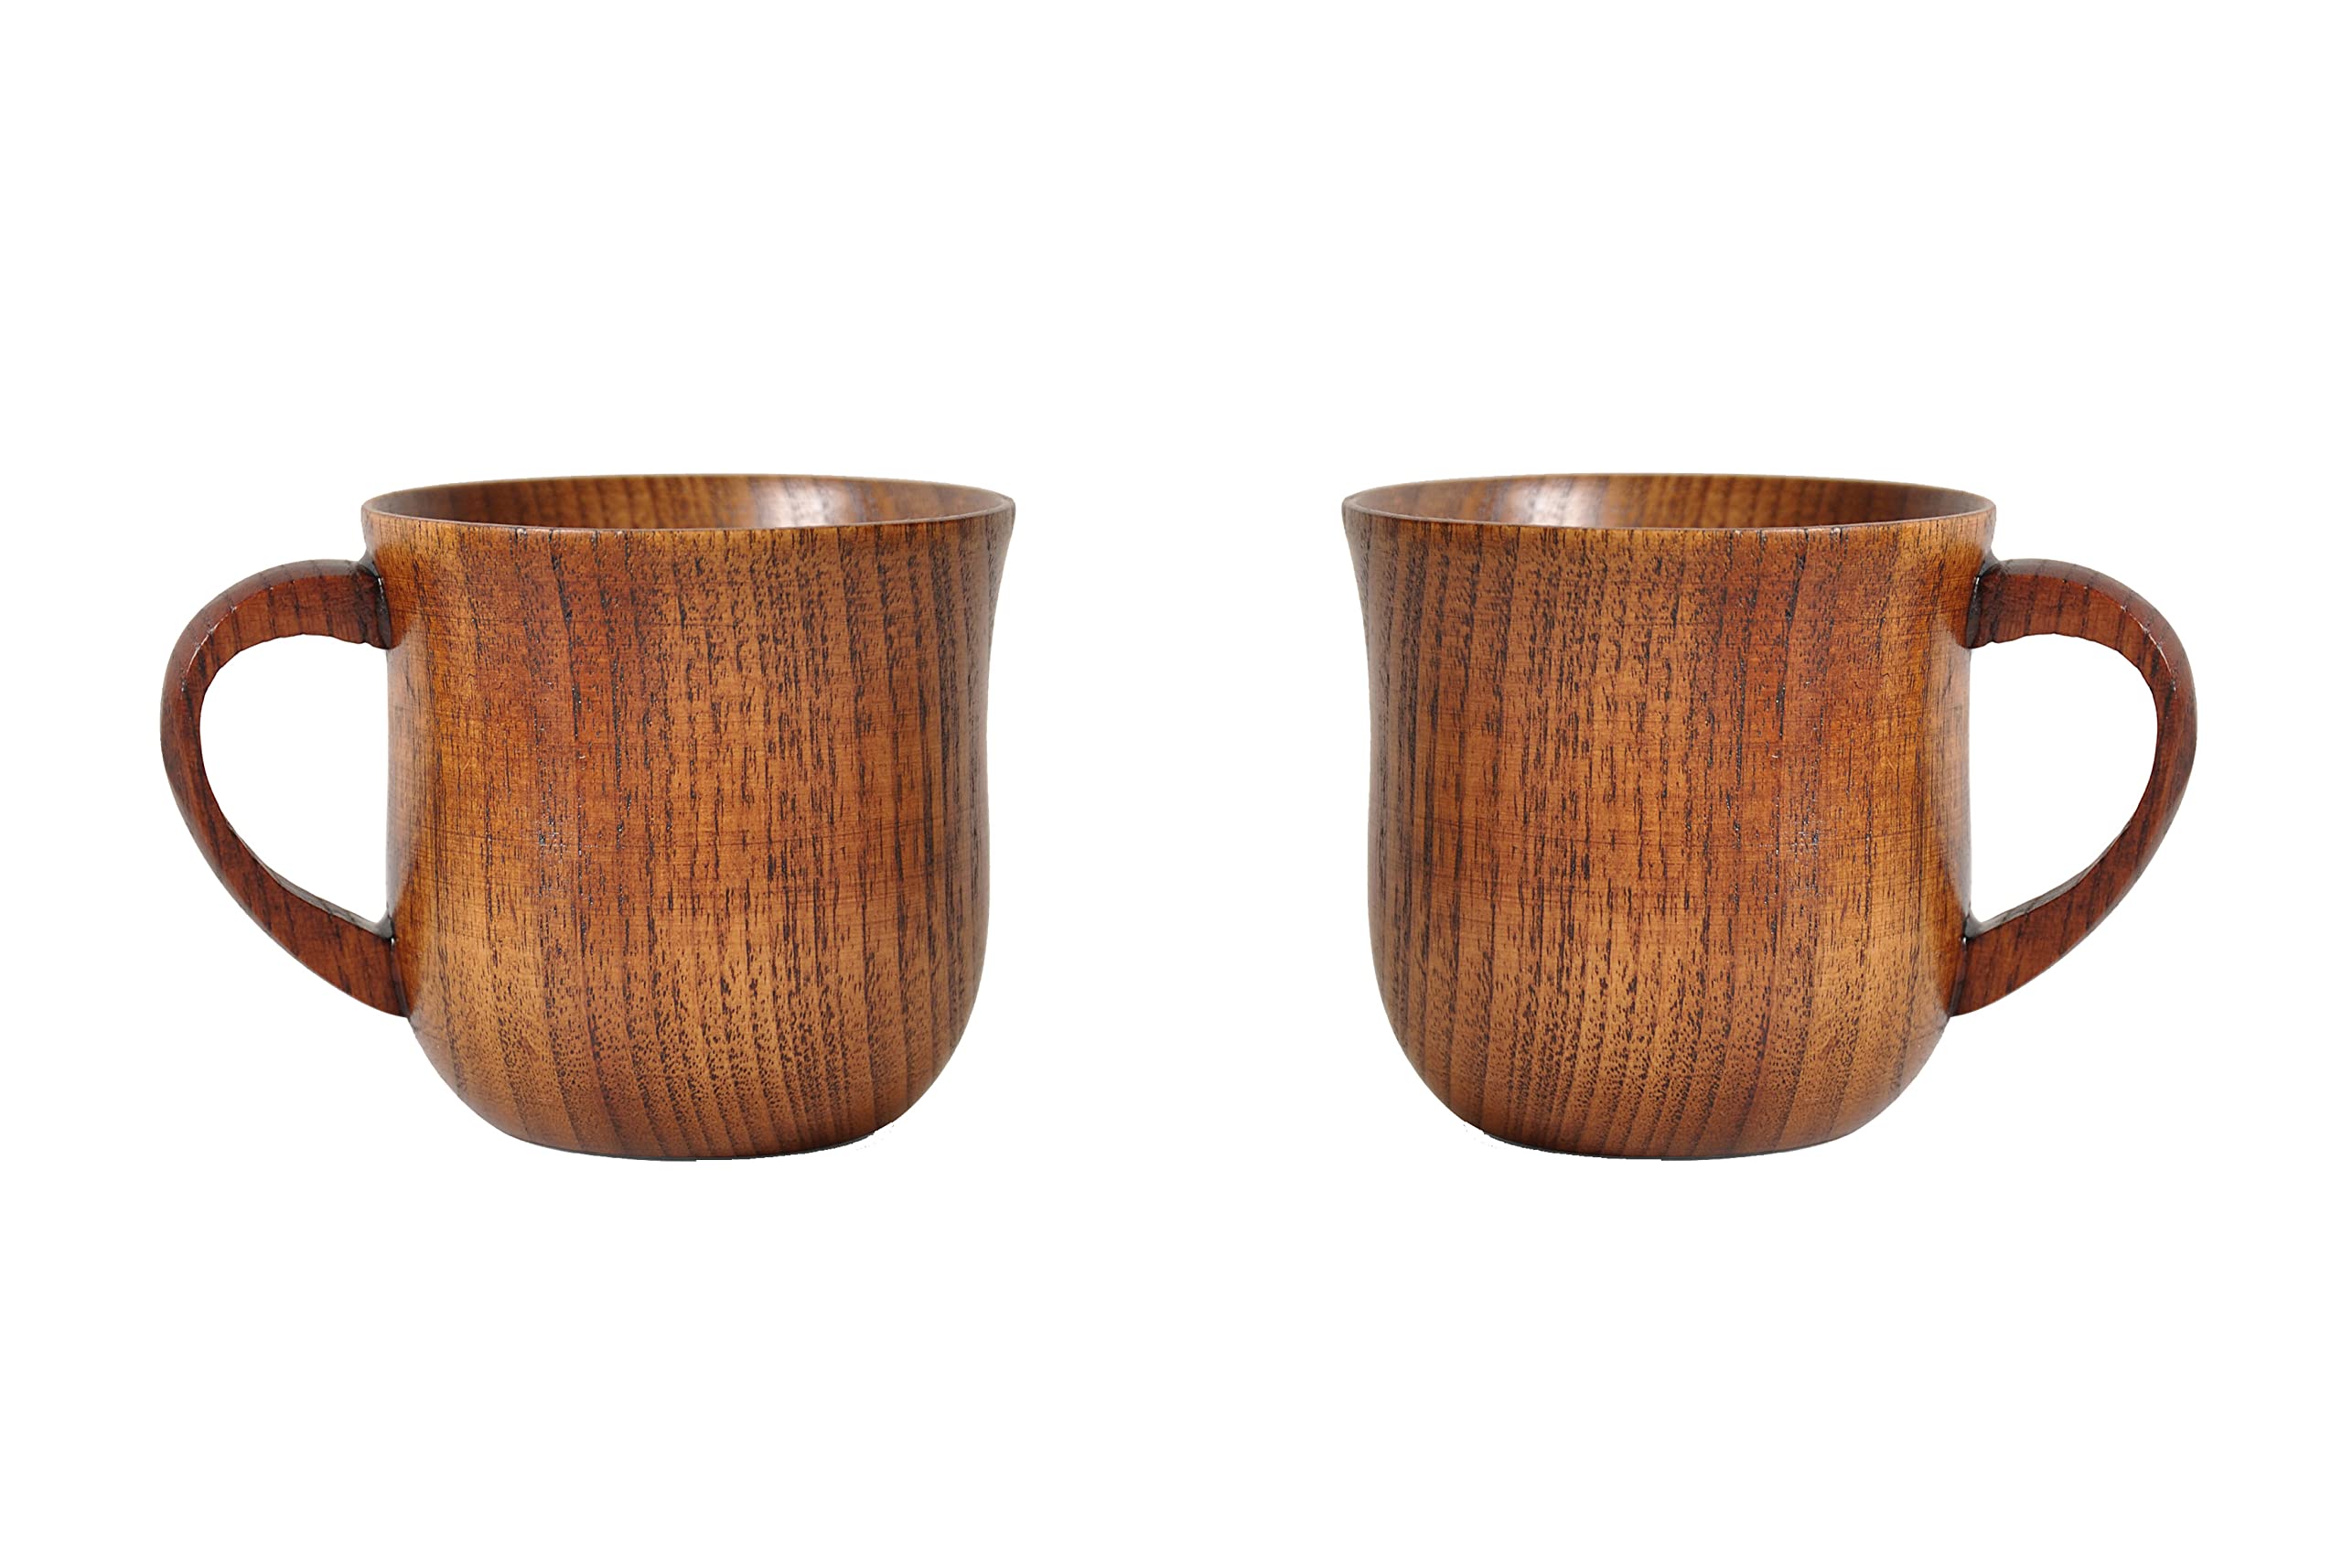 HomeImpel 2 Pack Wooden Coffee Cups Tea Cups With Handle, 4oz, 120ml, Drinking Wood Mugs for Beer/Coffee/Milk/Water